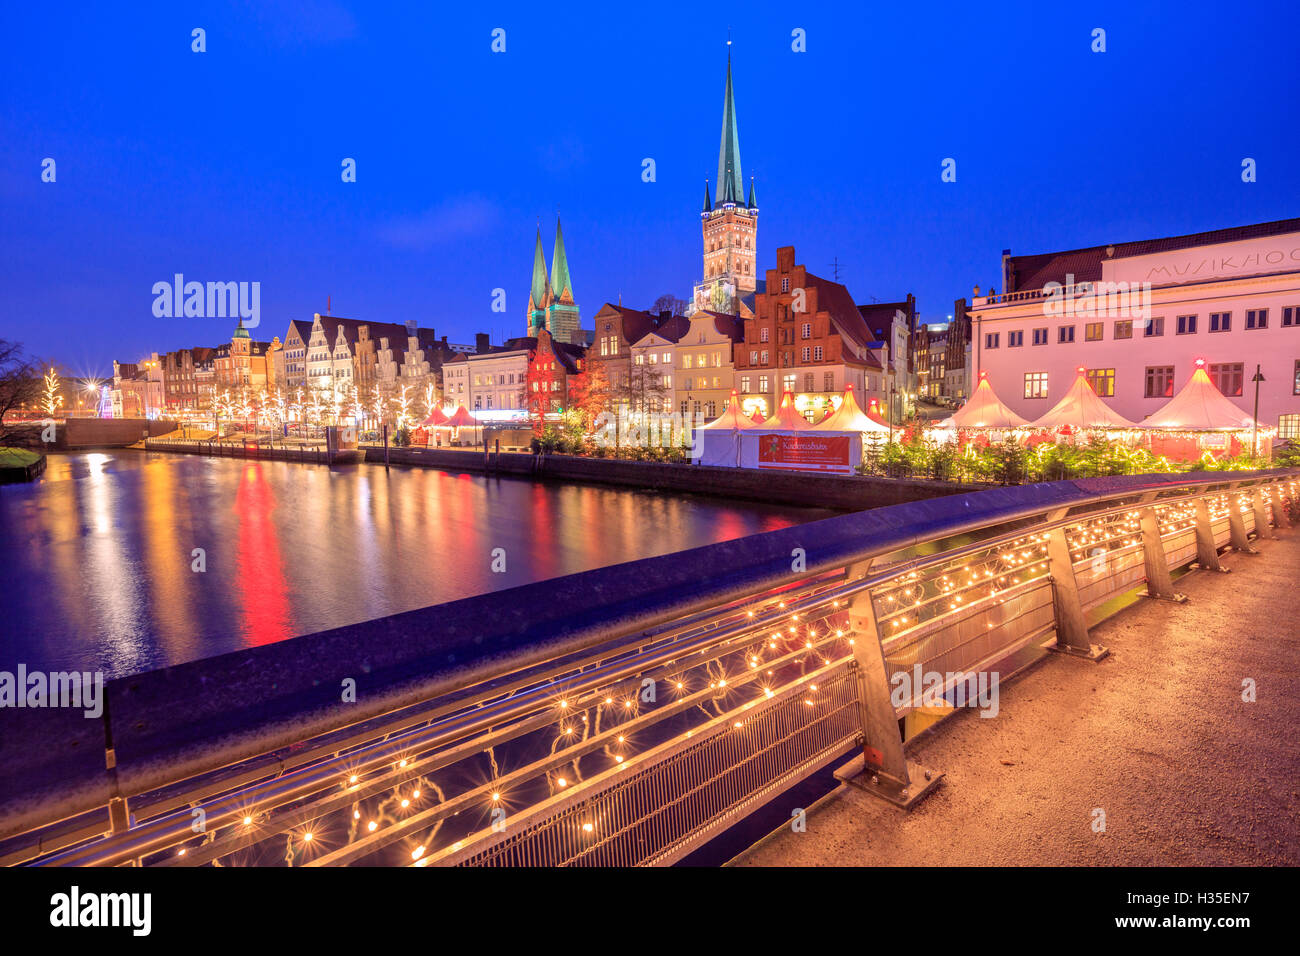 Night view of typical houses and the cathedral reflected in River Trave, Lubeck, Schleswig Holstein, Germany Stock Photo